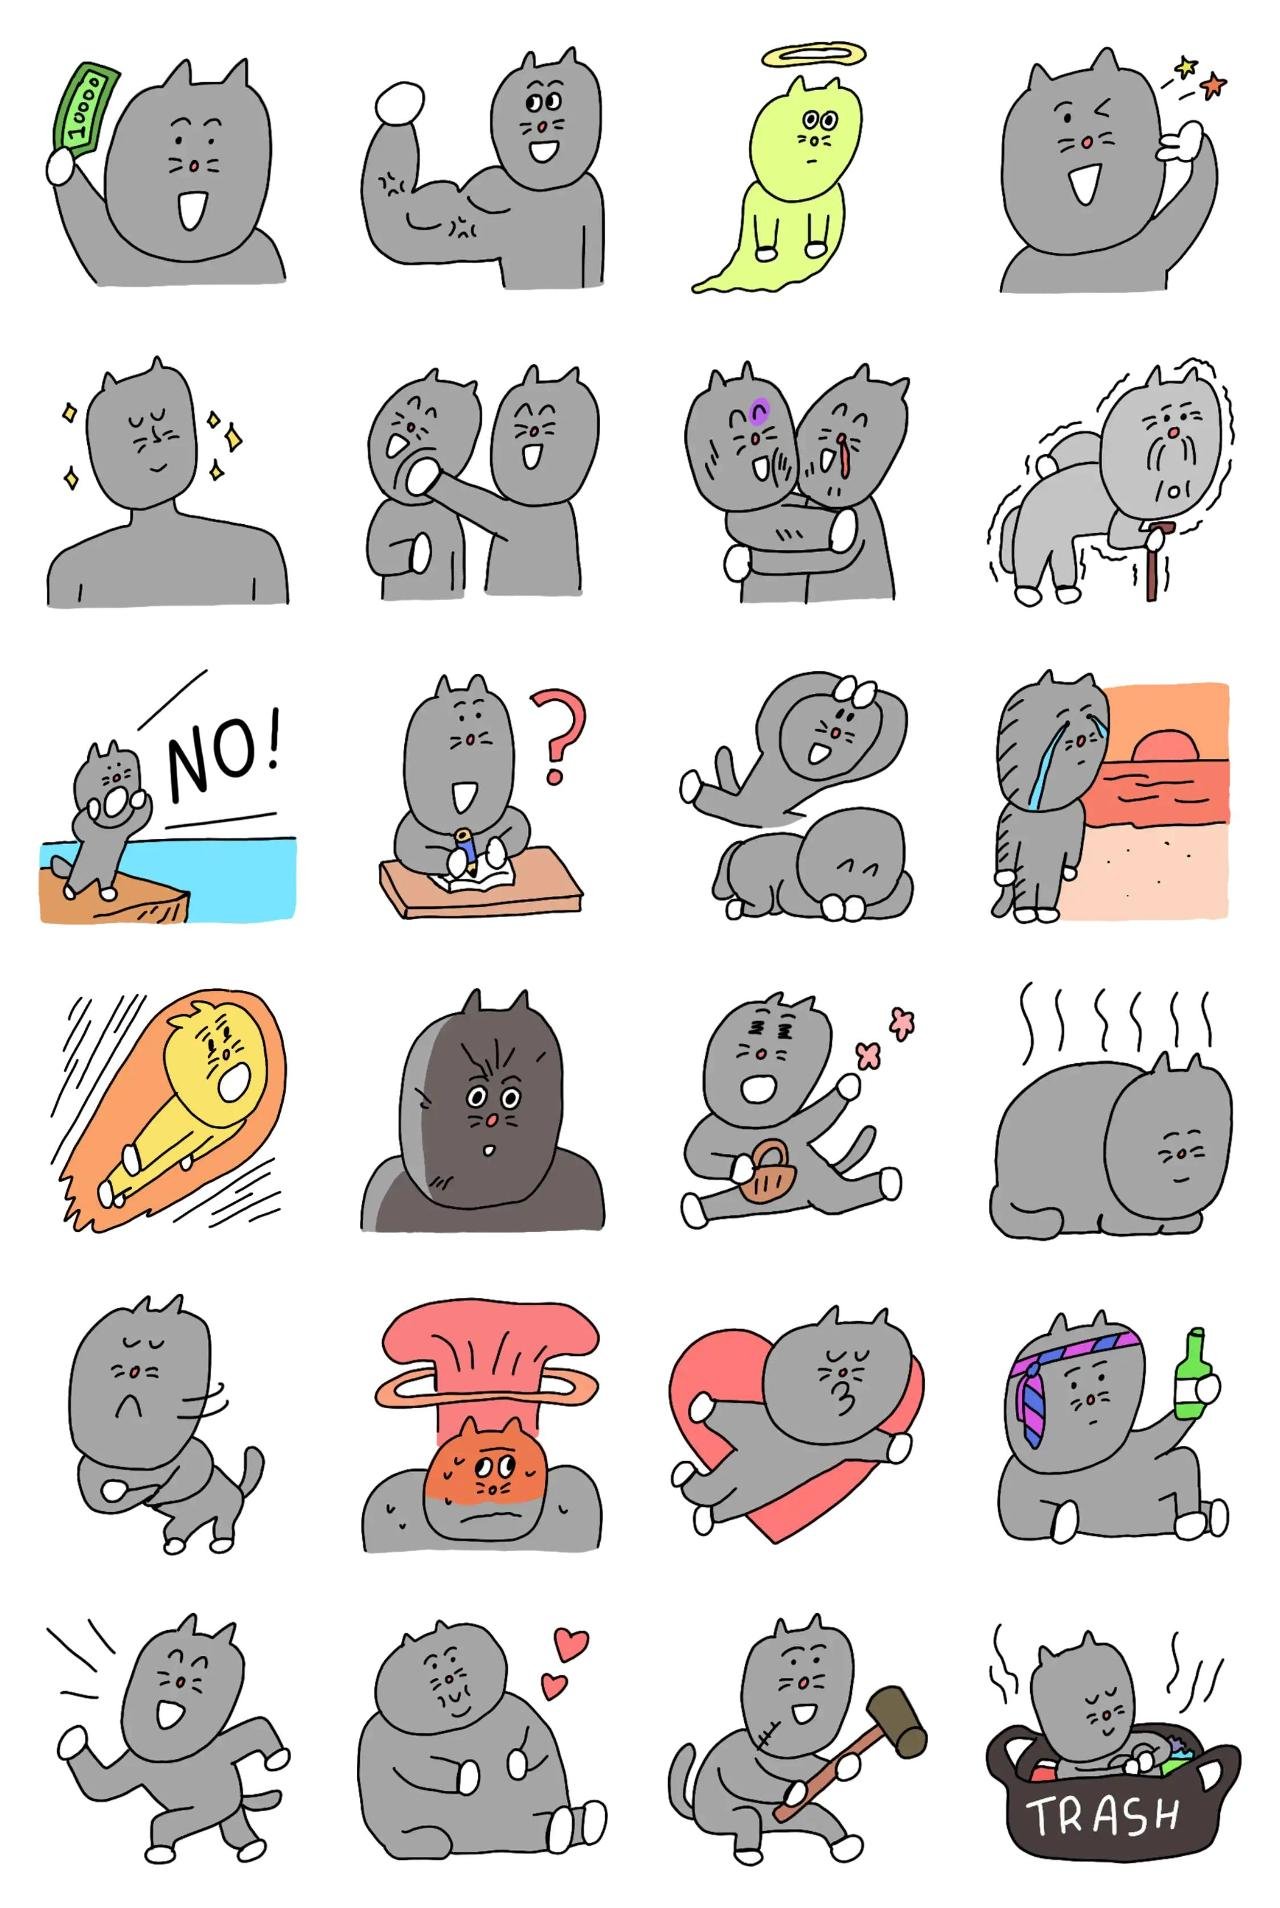 Kuku cat Animation/Cartoon,Gag sticker pack for Whatsapp, Telegram, Signal, and others chatting and message apps